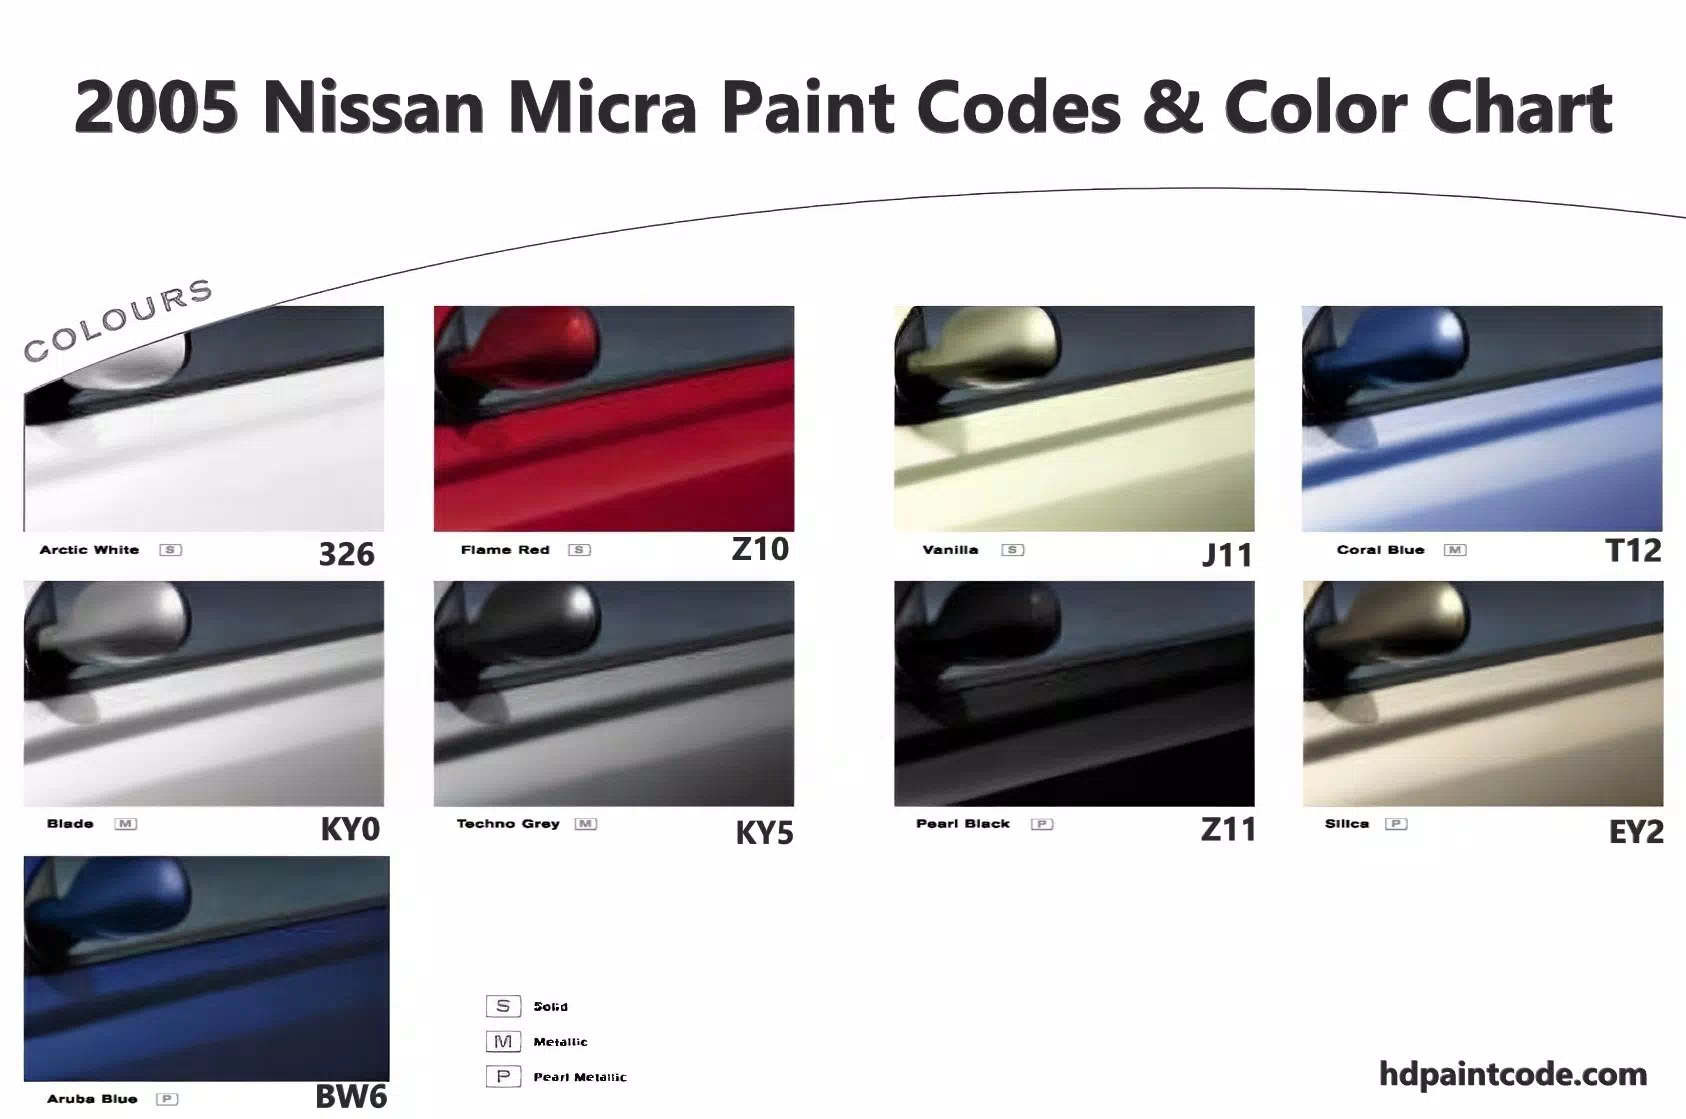 Oem paint codes, a paint example and color names for all 2005 Nissan Micra automobiles.